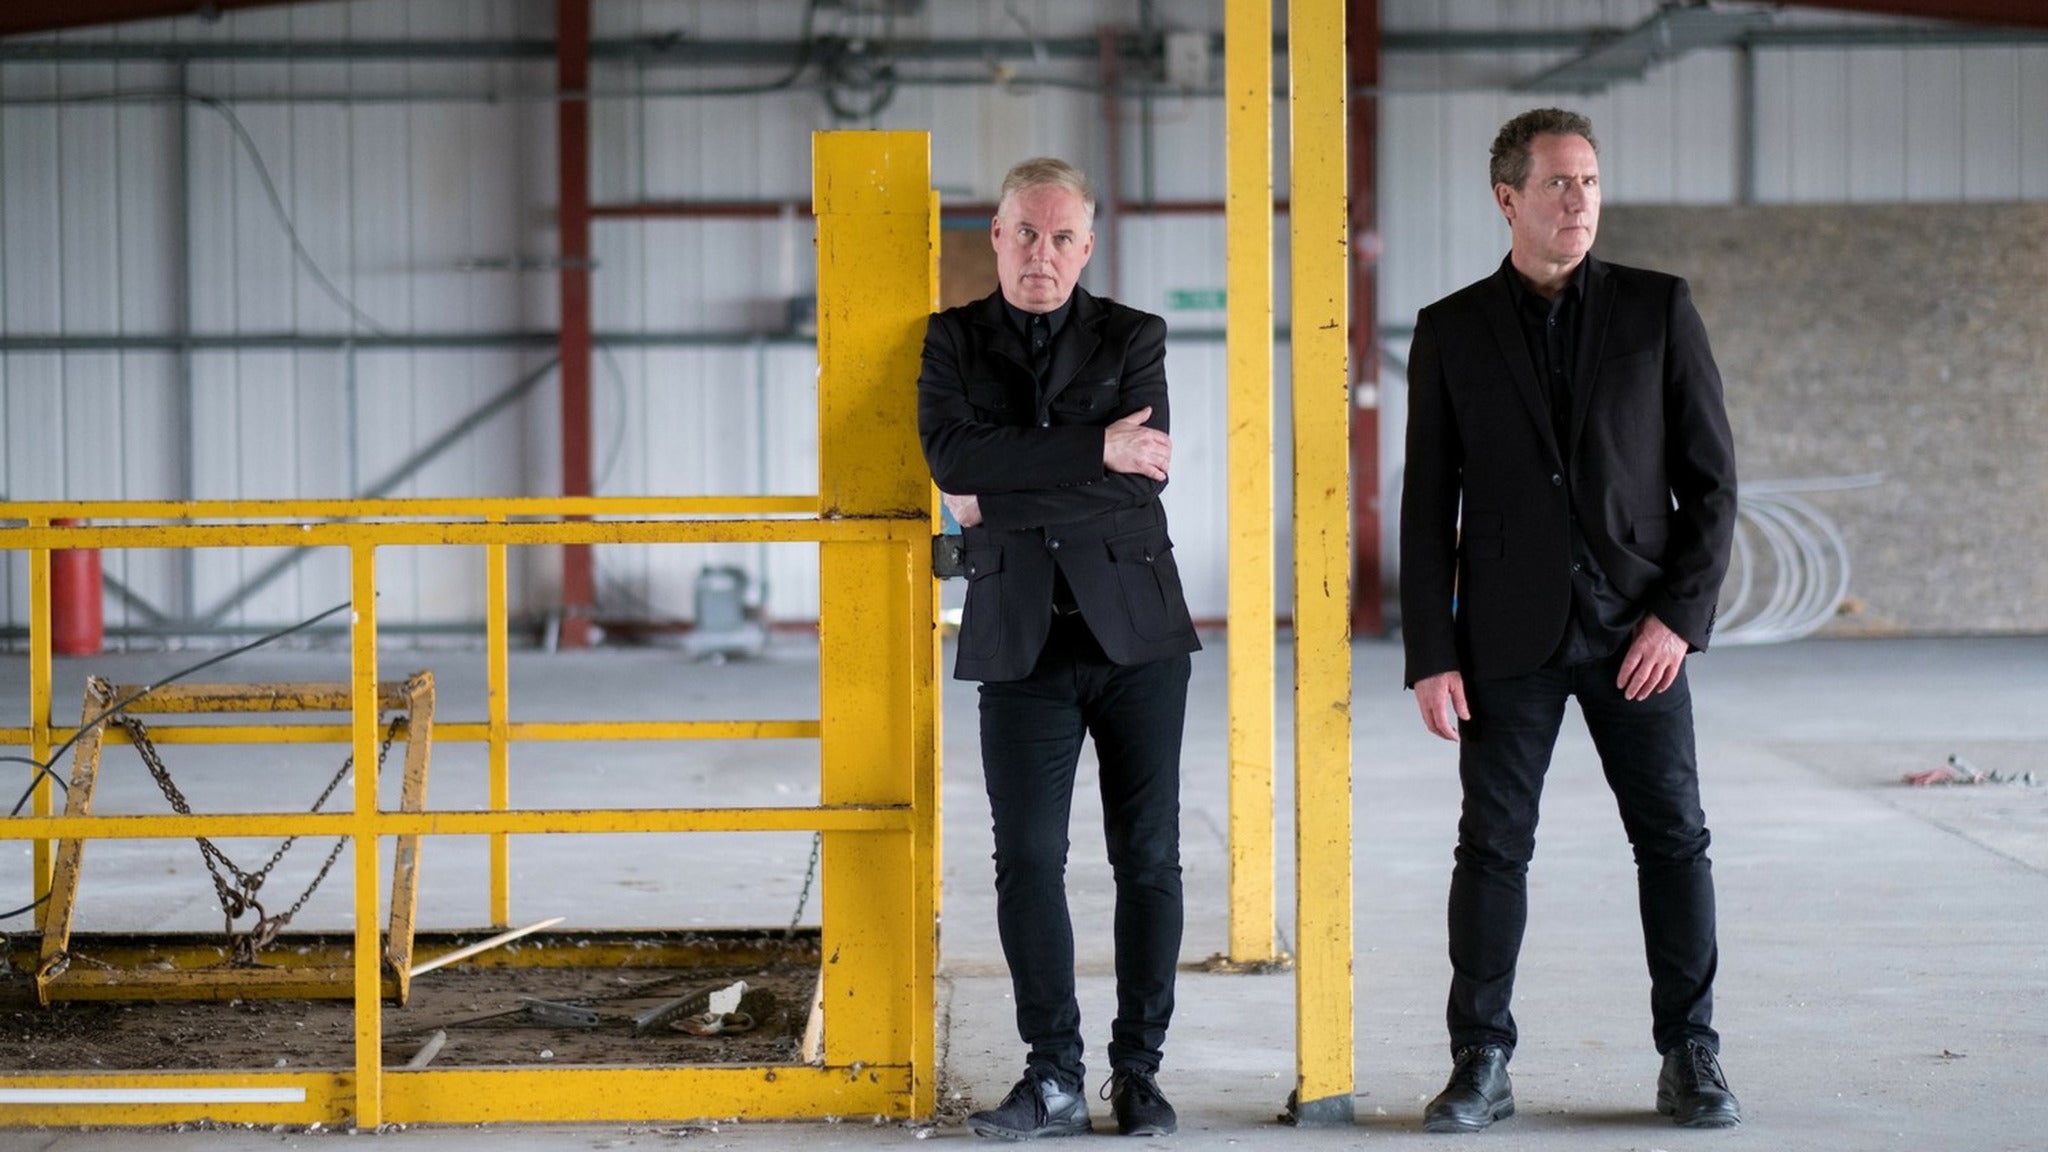 OMD Souvenir OMD 40 YEARS   GREATEST HITS in Houston promo photo for Artist presale offer code